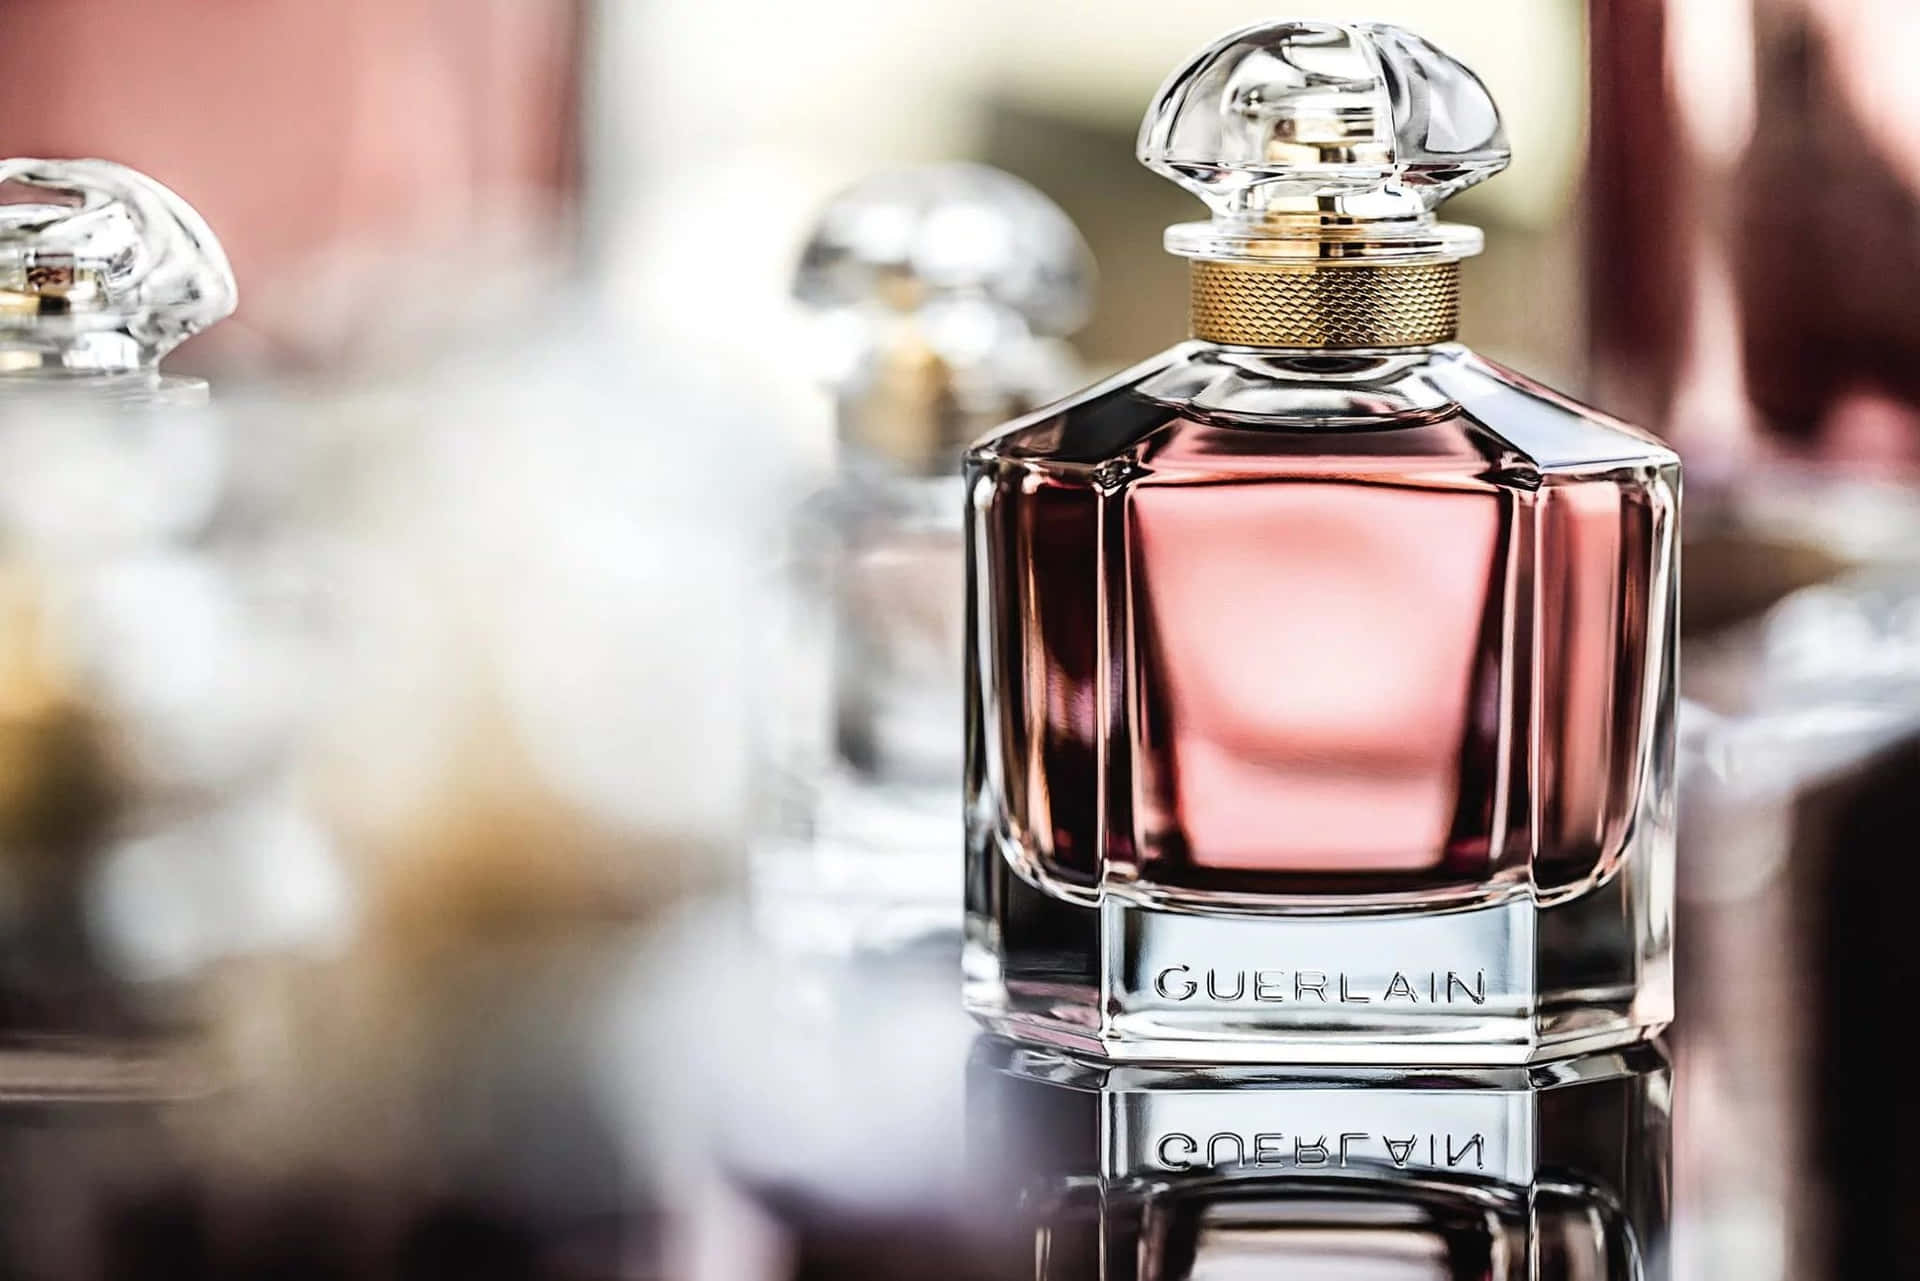 Make a statement and smell great with the perfect perfume